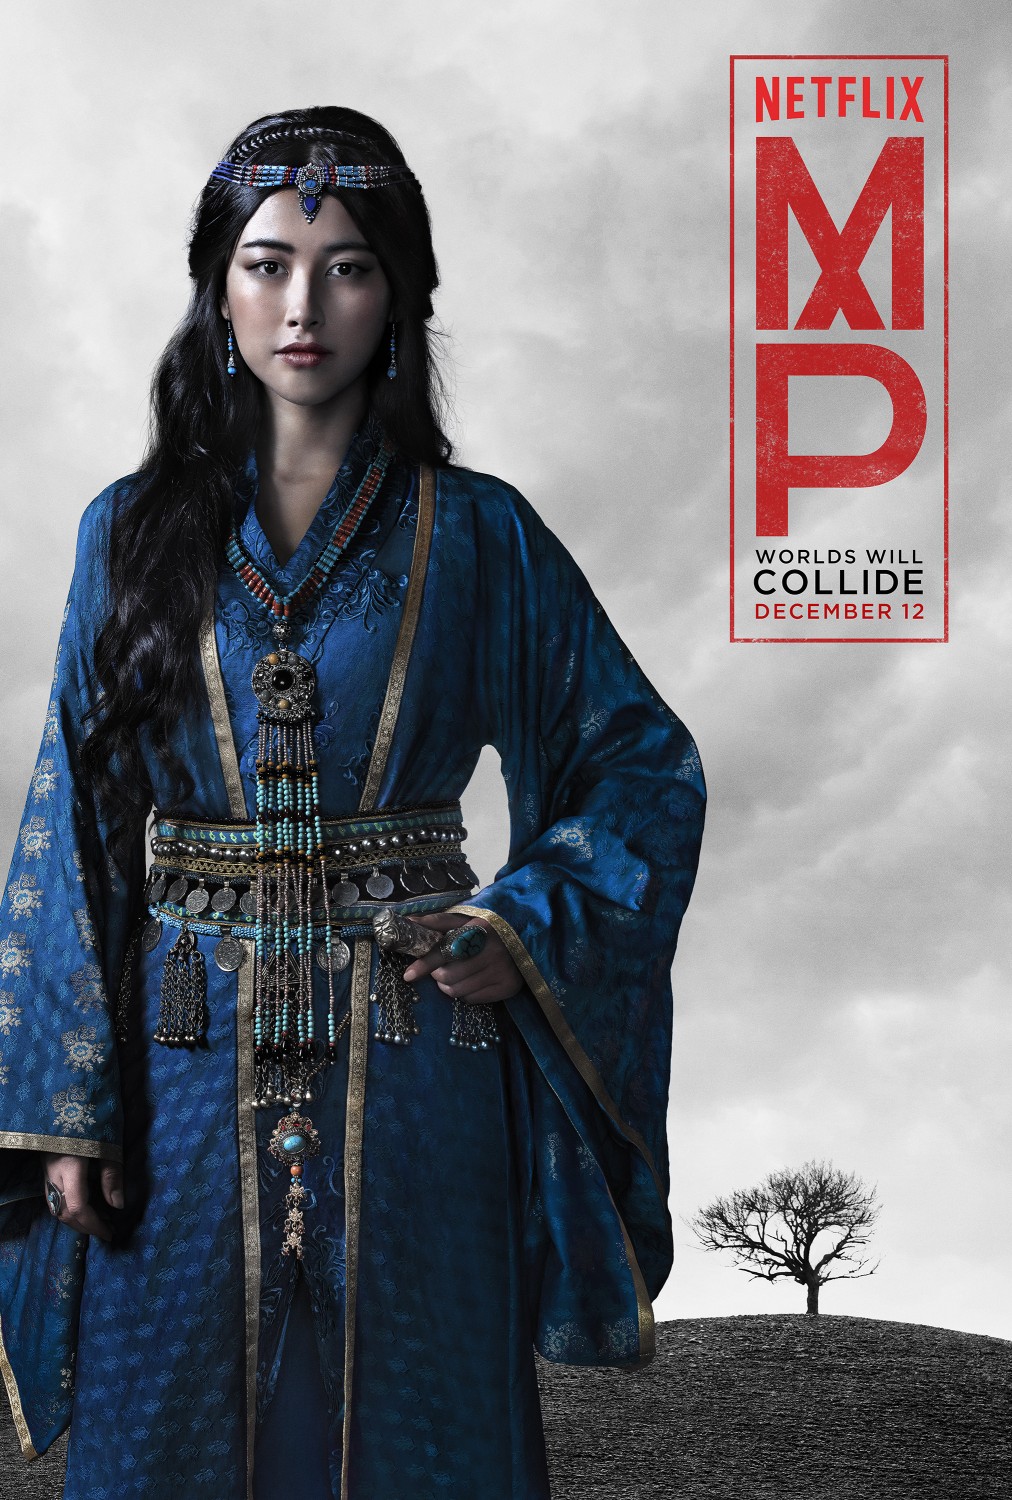 Extra Large TV Poster Image for Marco Polo (#6 of 12)